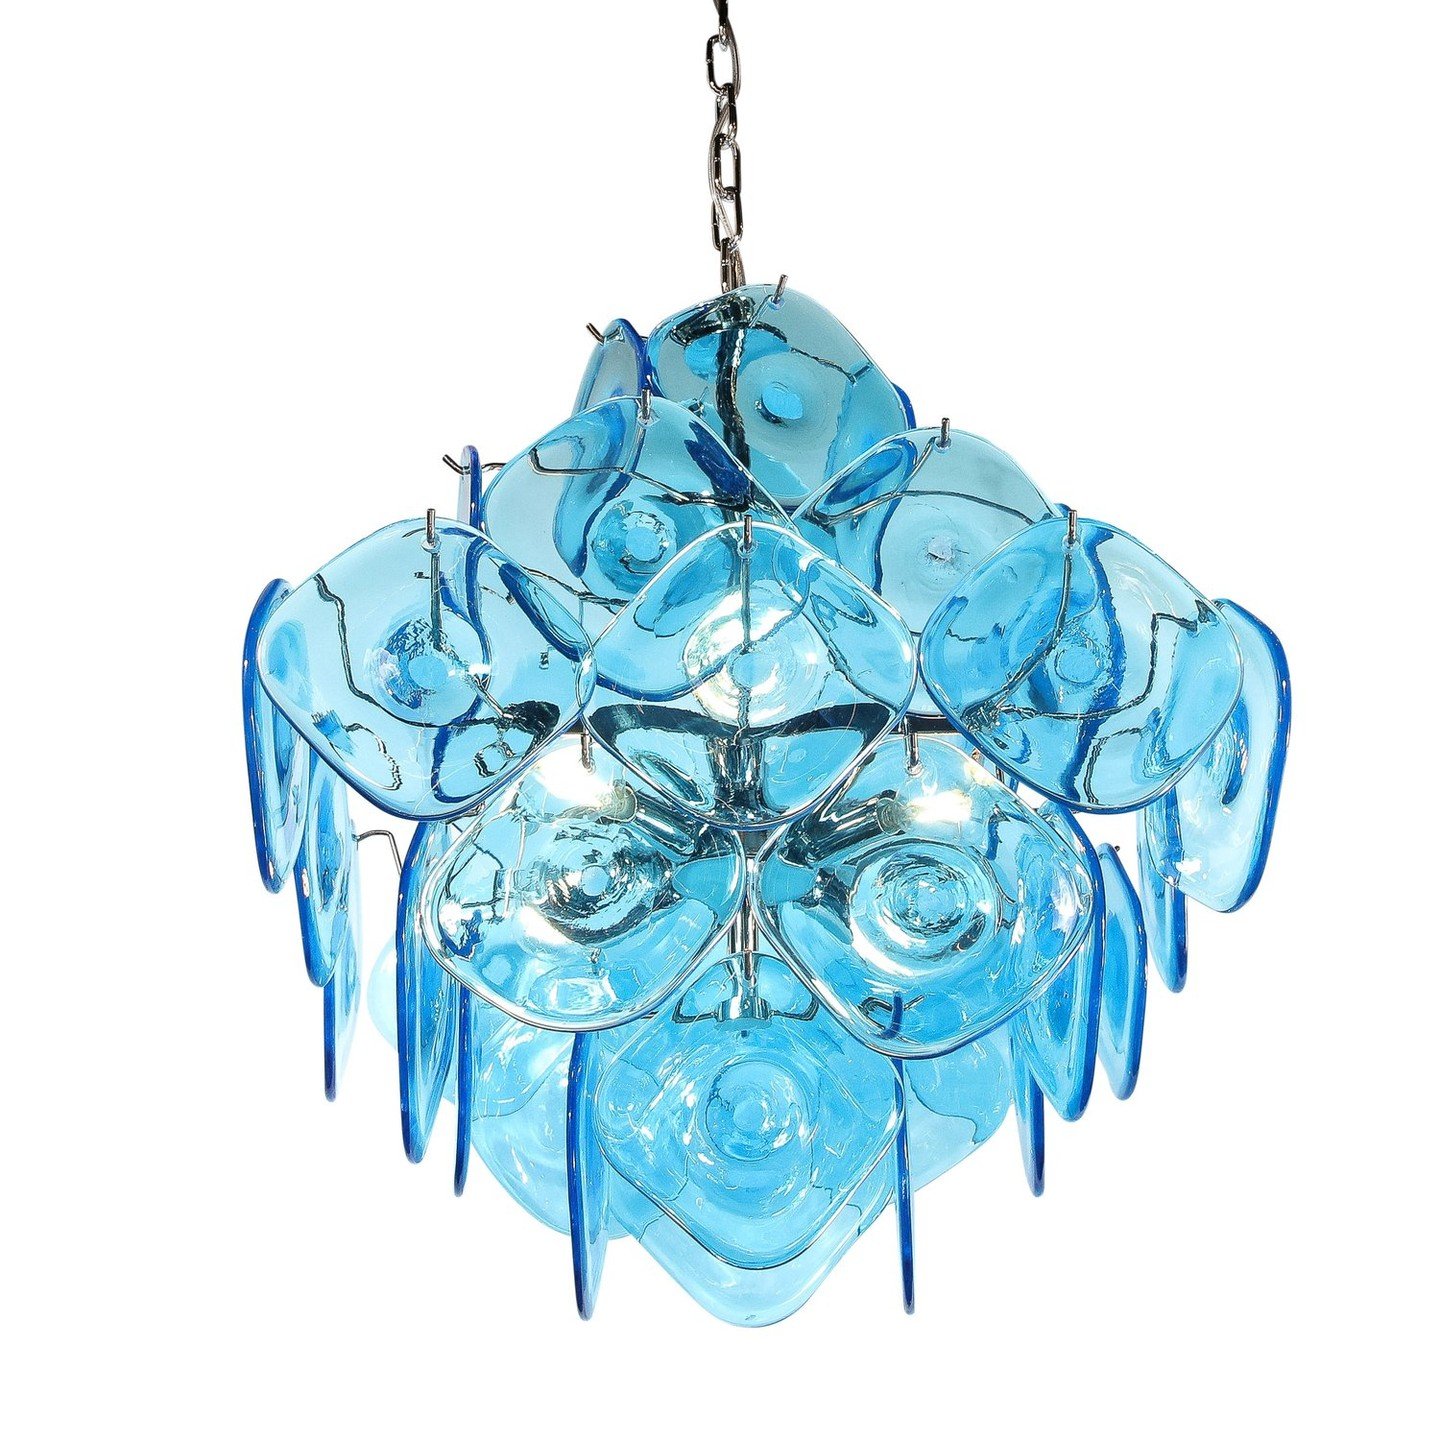 Modernist Pagoda Form Hand-Blown Cerulean Blue Murano Glass Chandelier

This Modernist Pagoda Form Hand-Blown Cerullean Blue Murano Glass Chandelier originates from Murano Italy during the latter half of the 20th century. Features of five tier pagoda